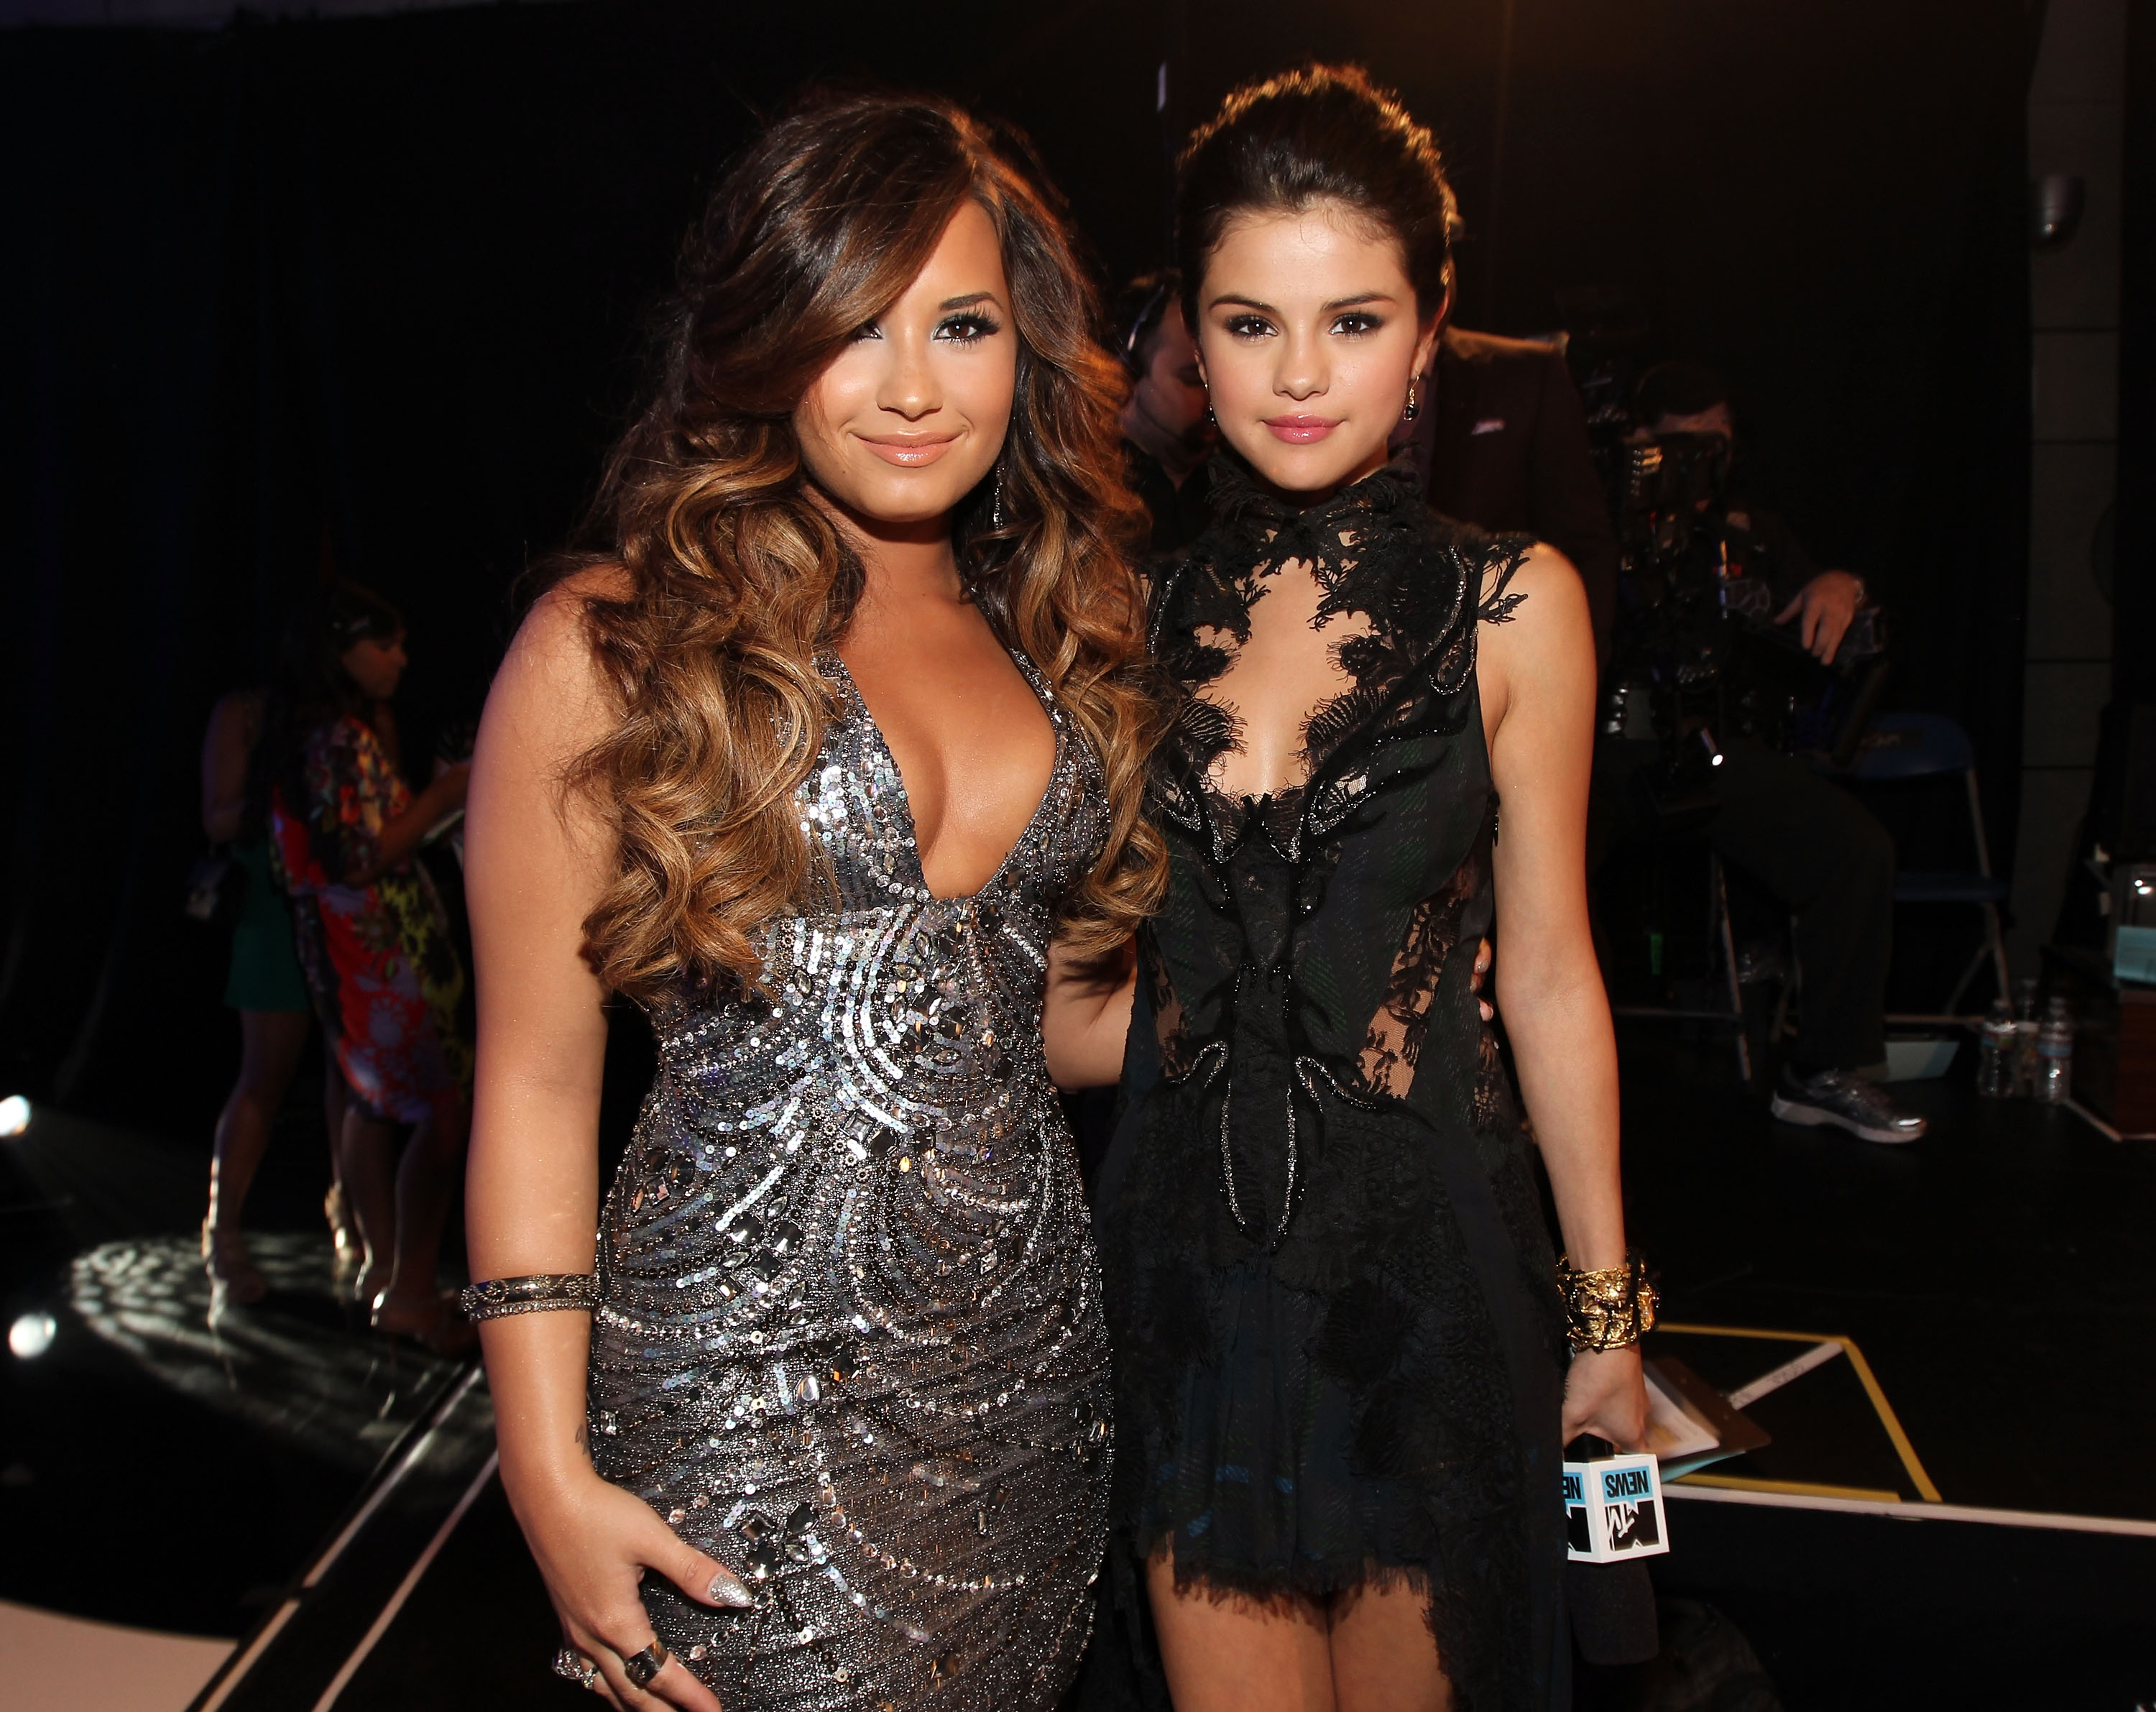 Demi Lovato (L) and Selena Gomez arrive at the 2011 MTV Video Music Awards on August 28, 2011, in Los Angeles, California. 